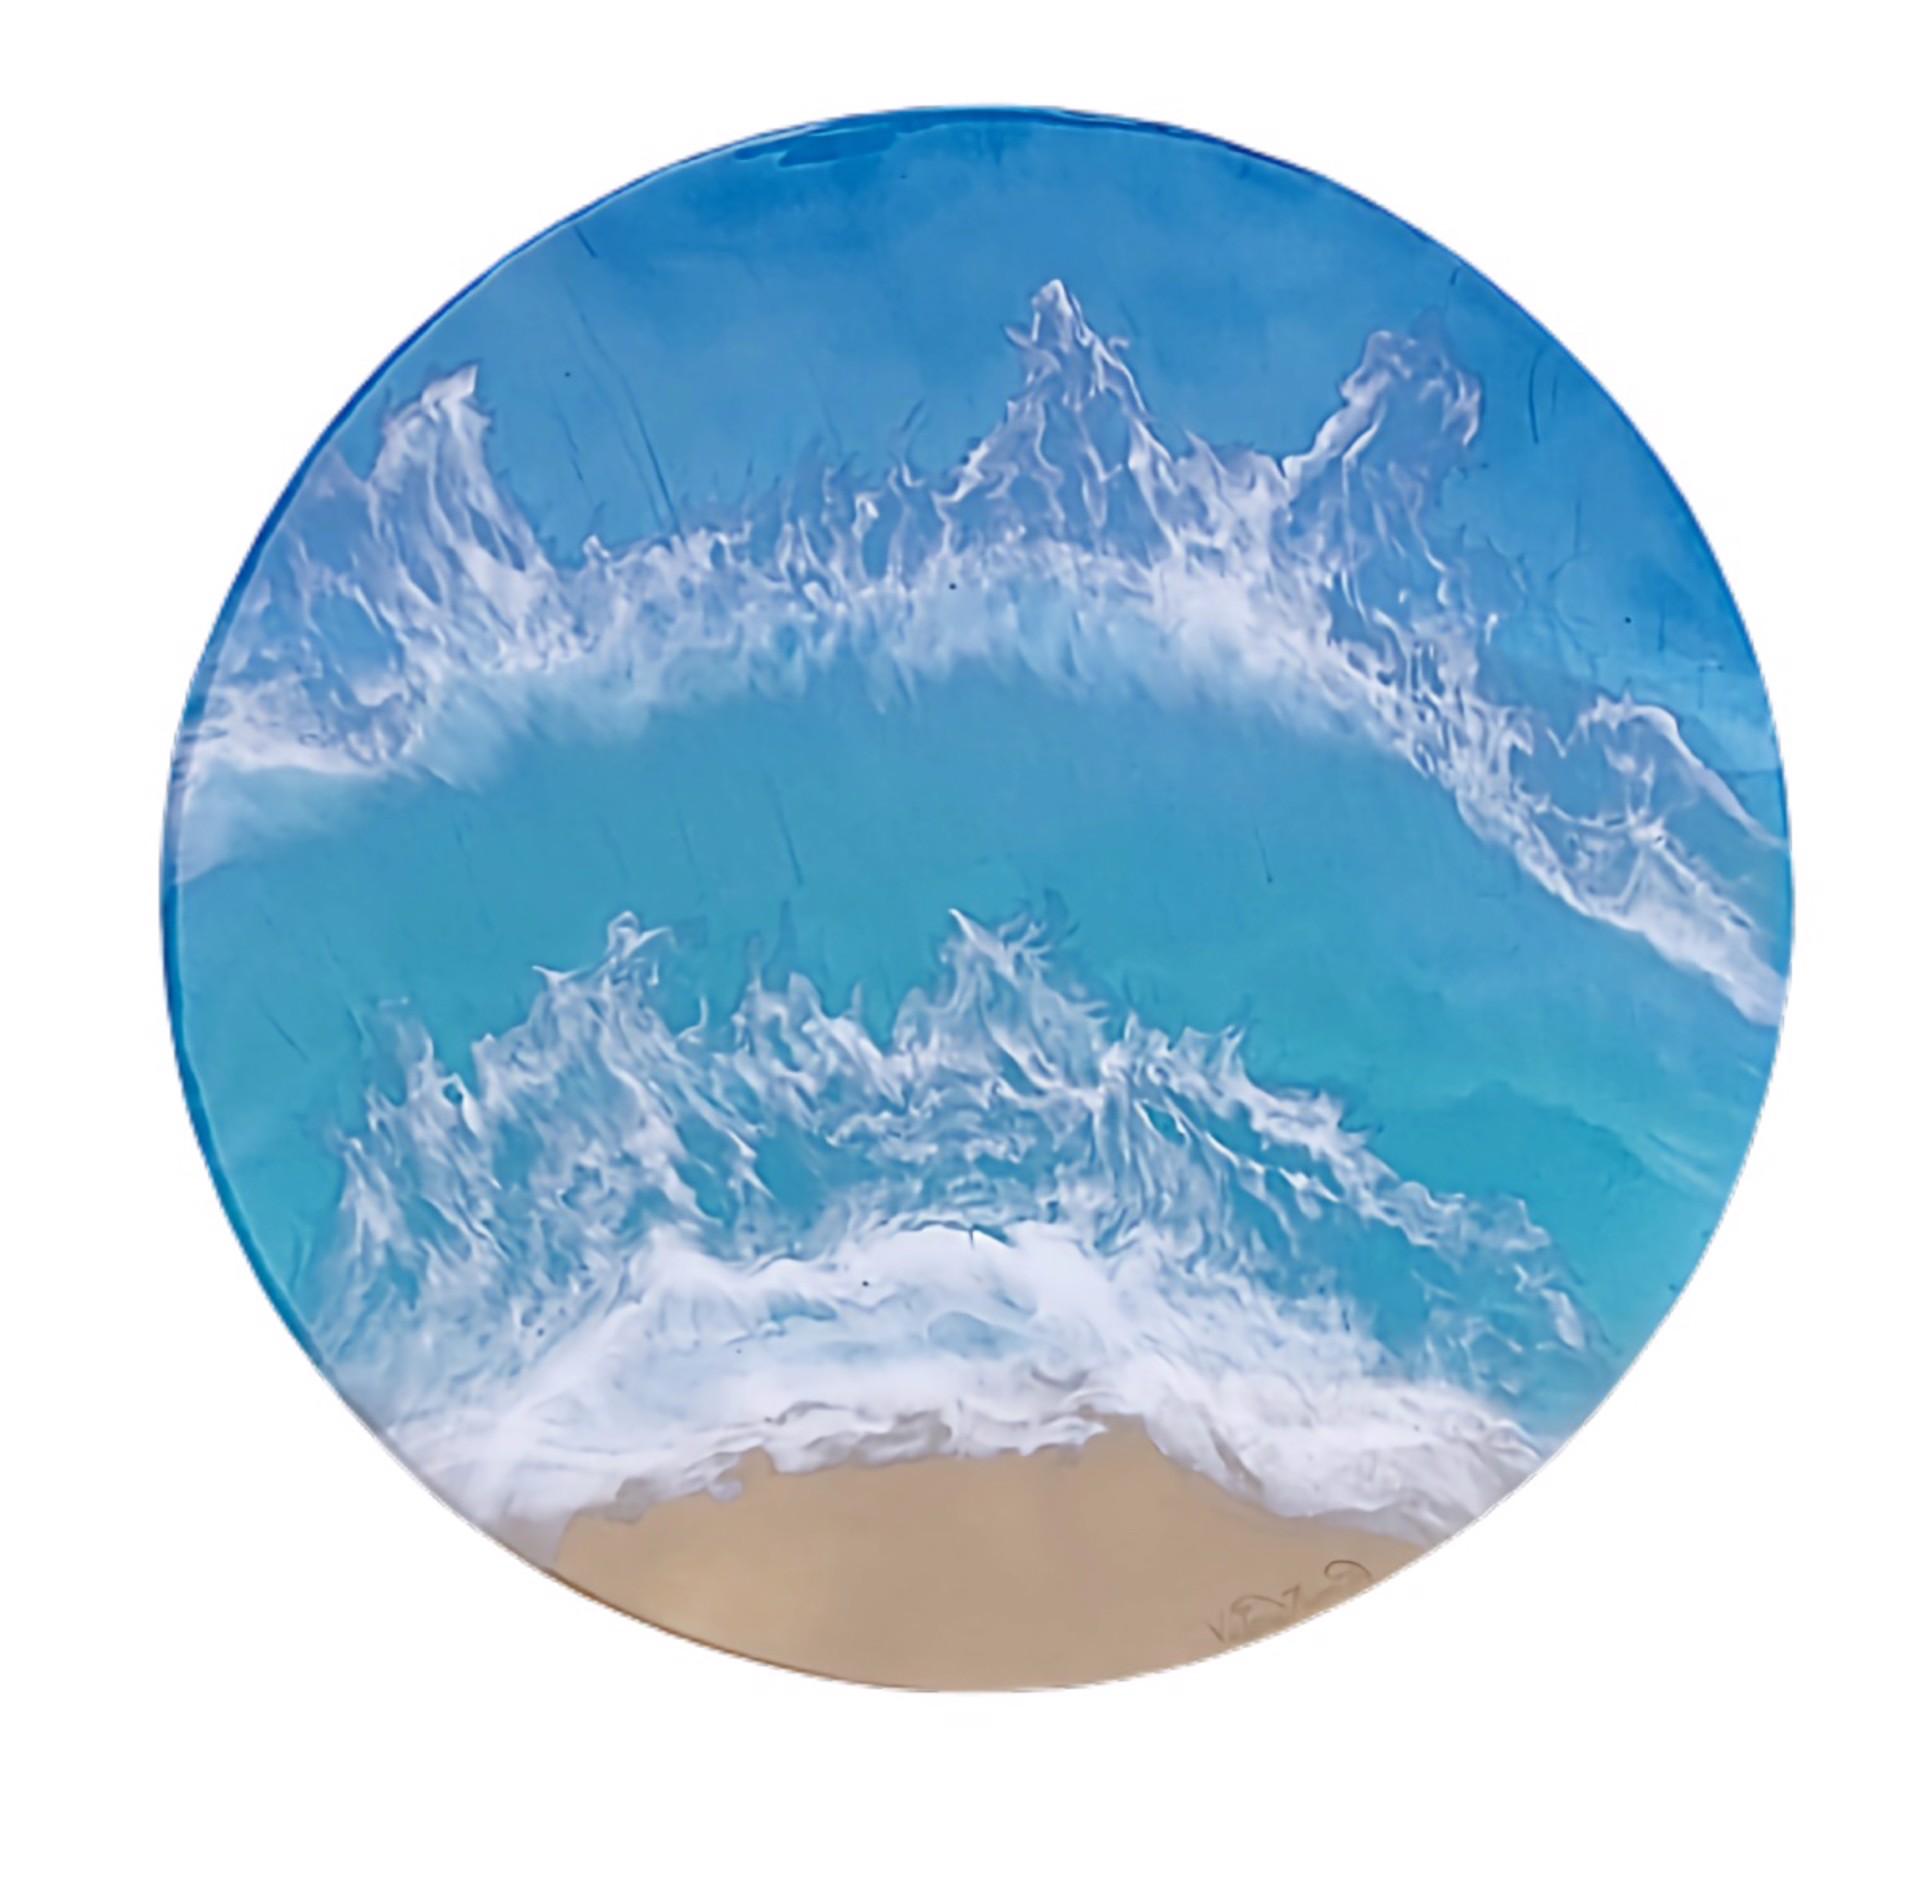 Changing Tide (Ocean Round) by Victoria Thornton